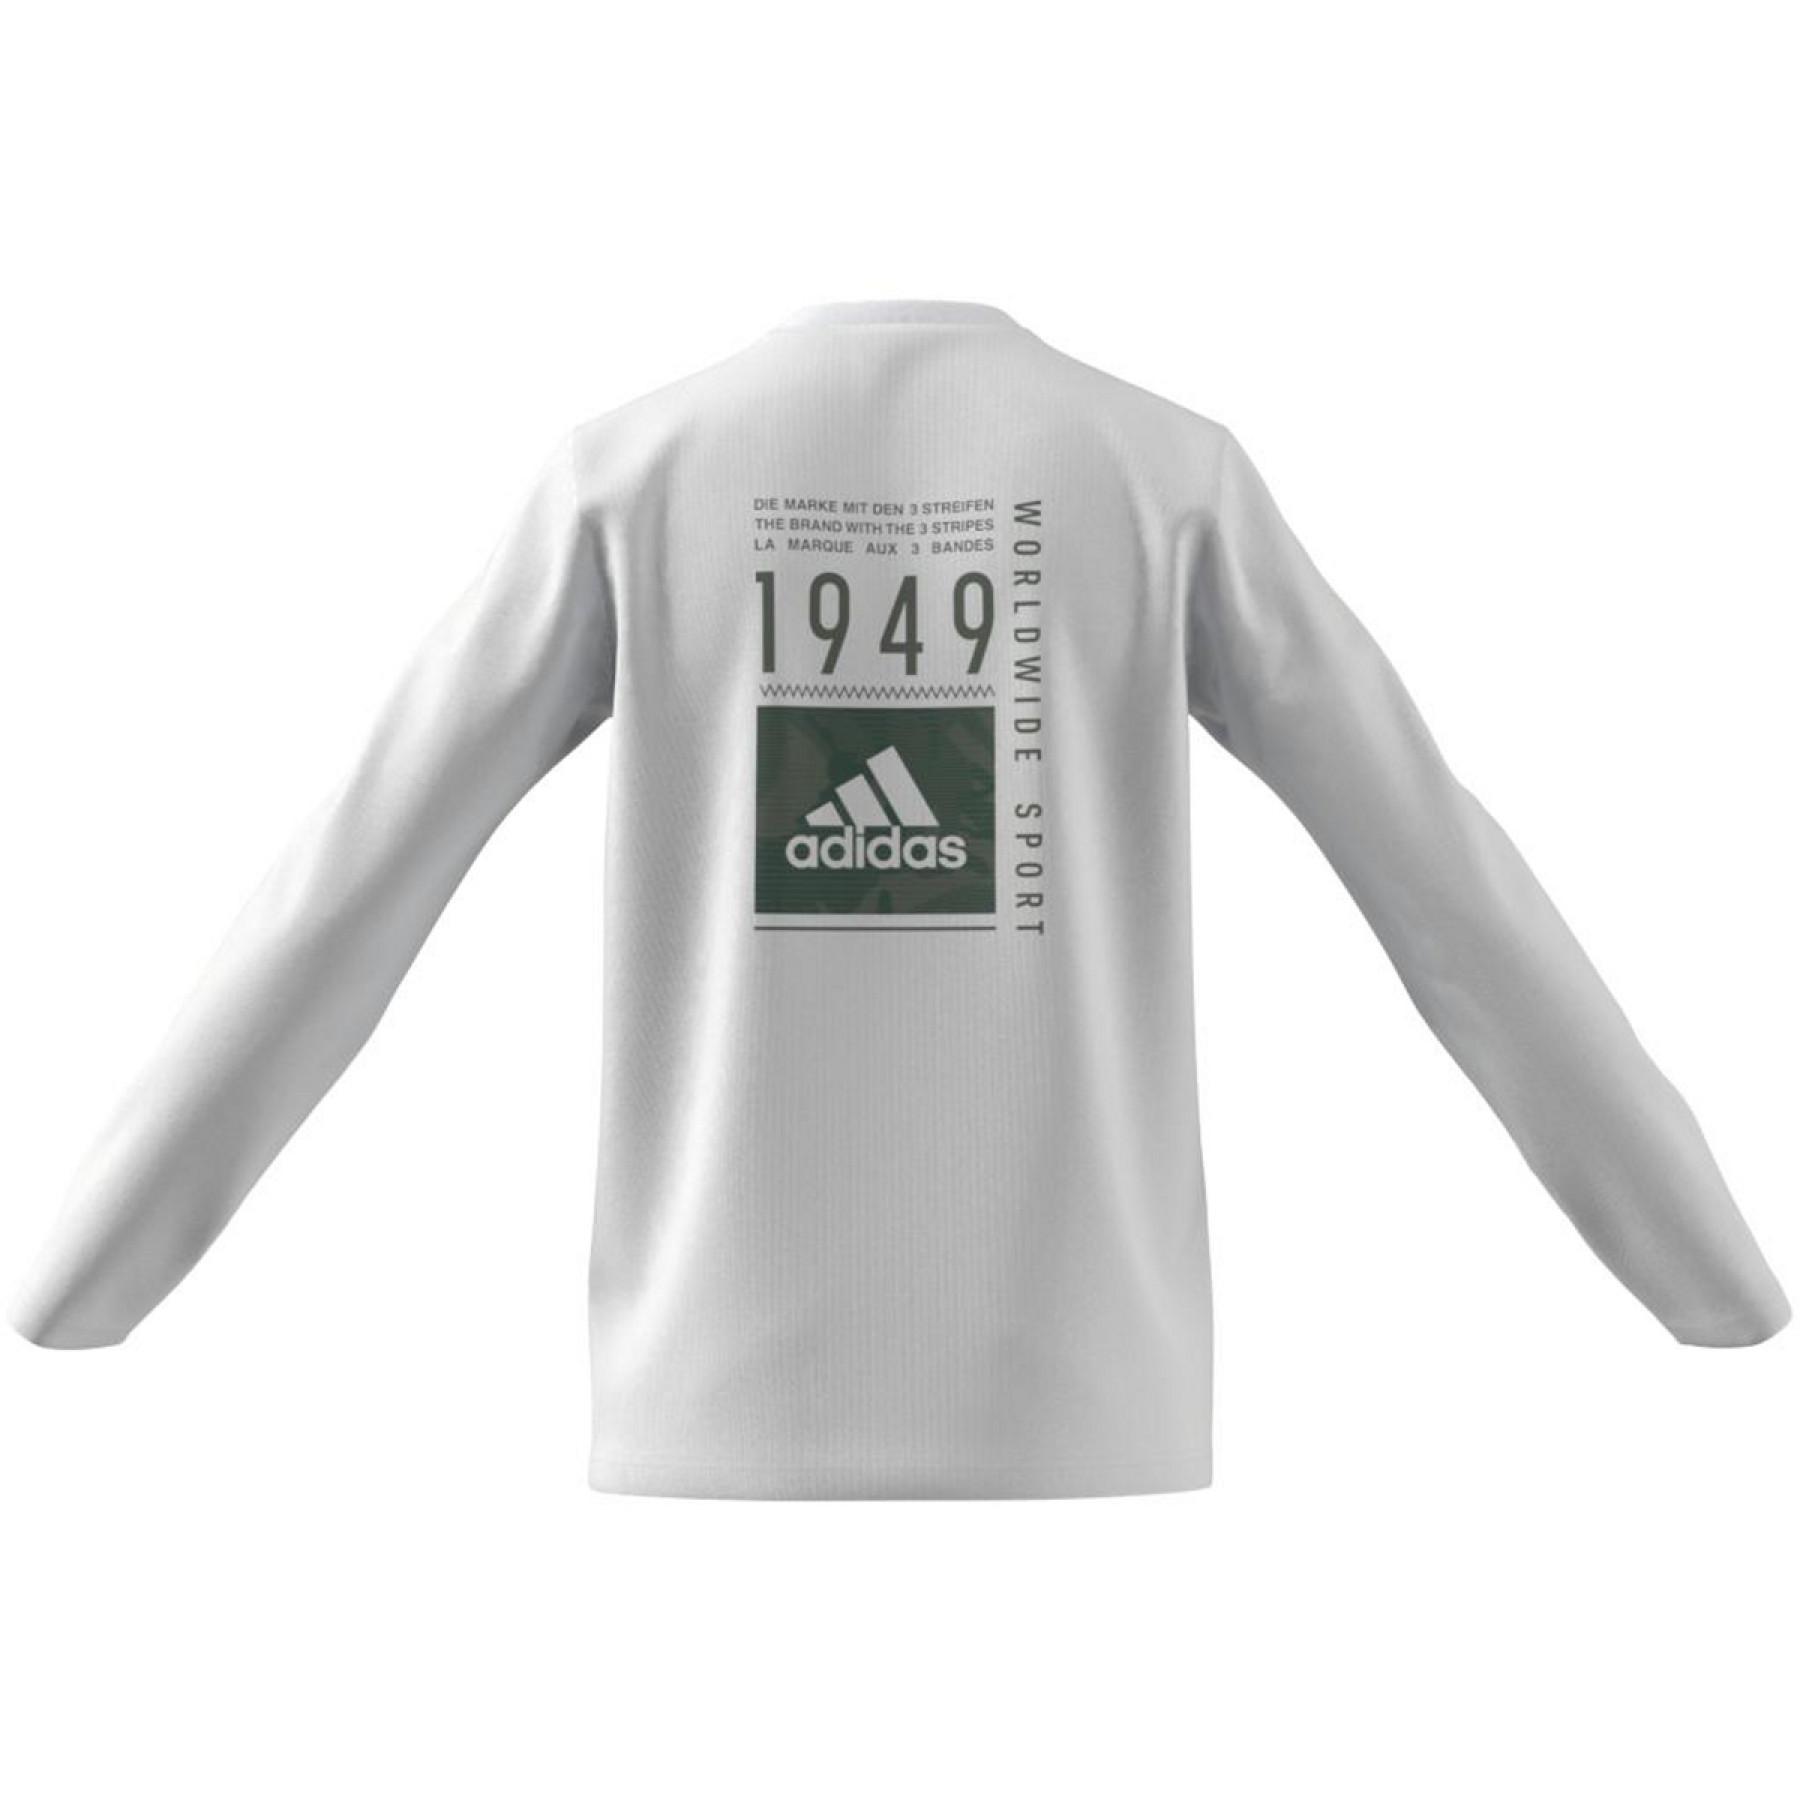 T-shirt adidas Worldwide Sport Front Back Graphic